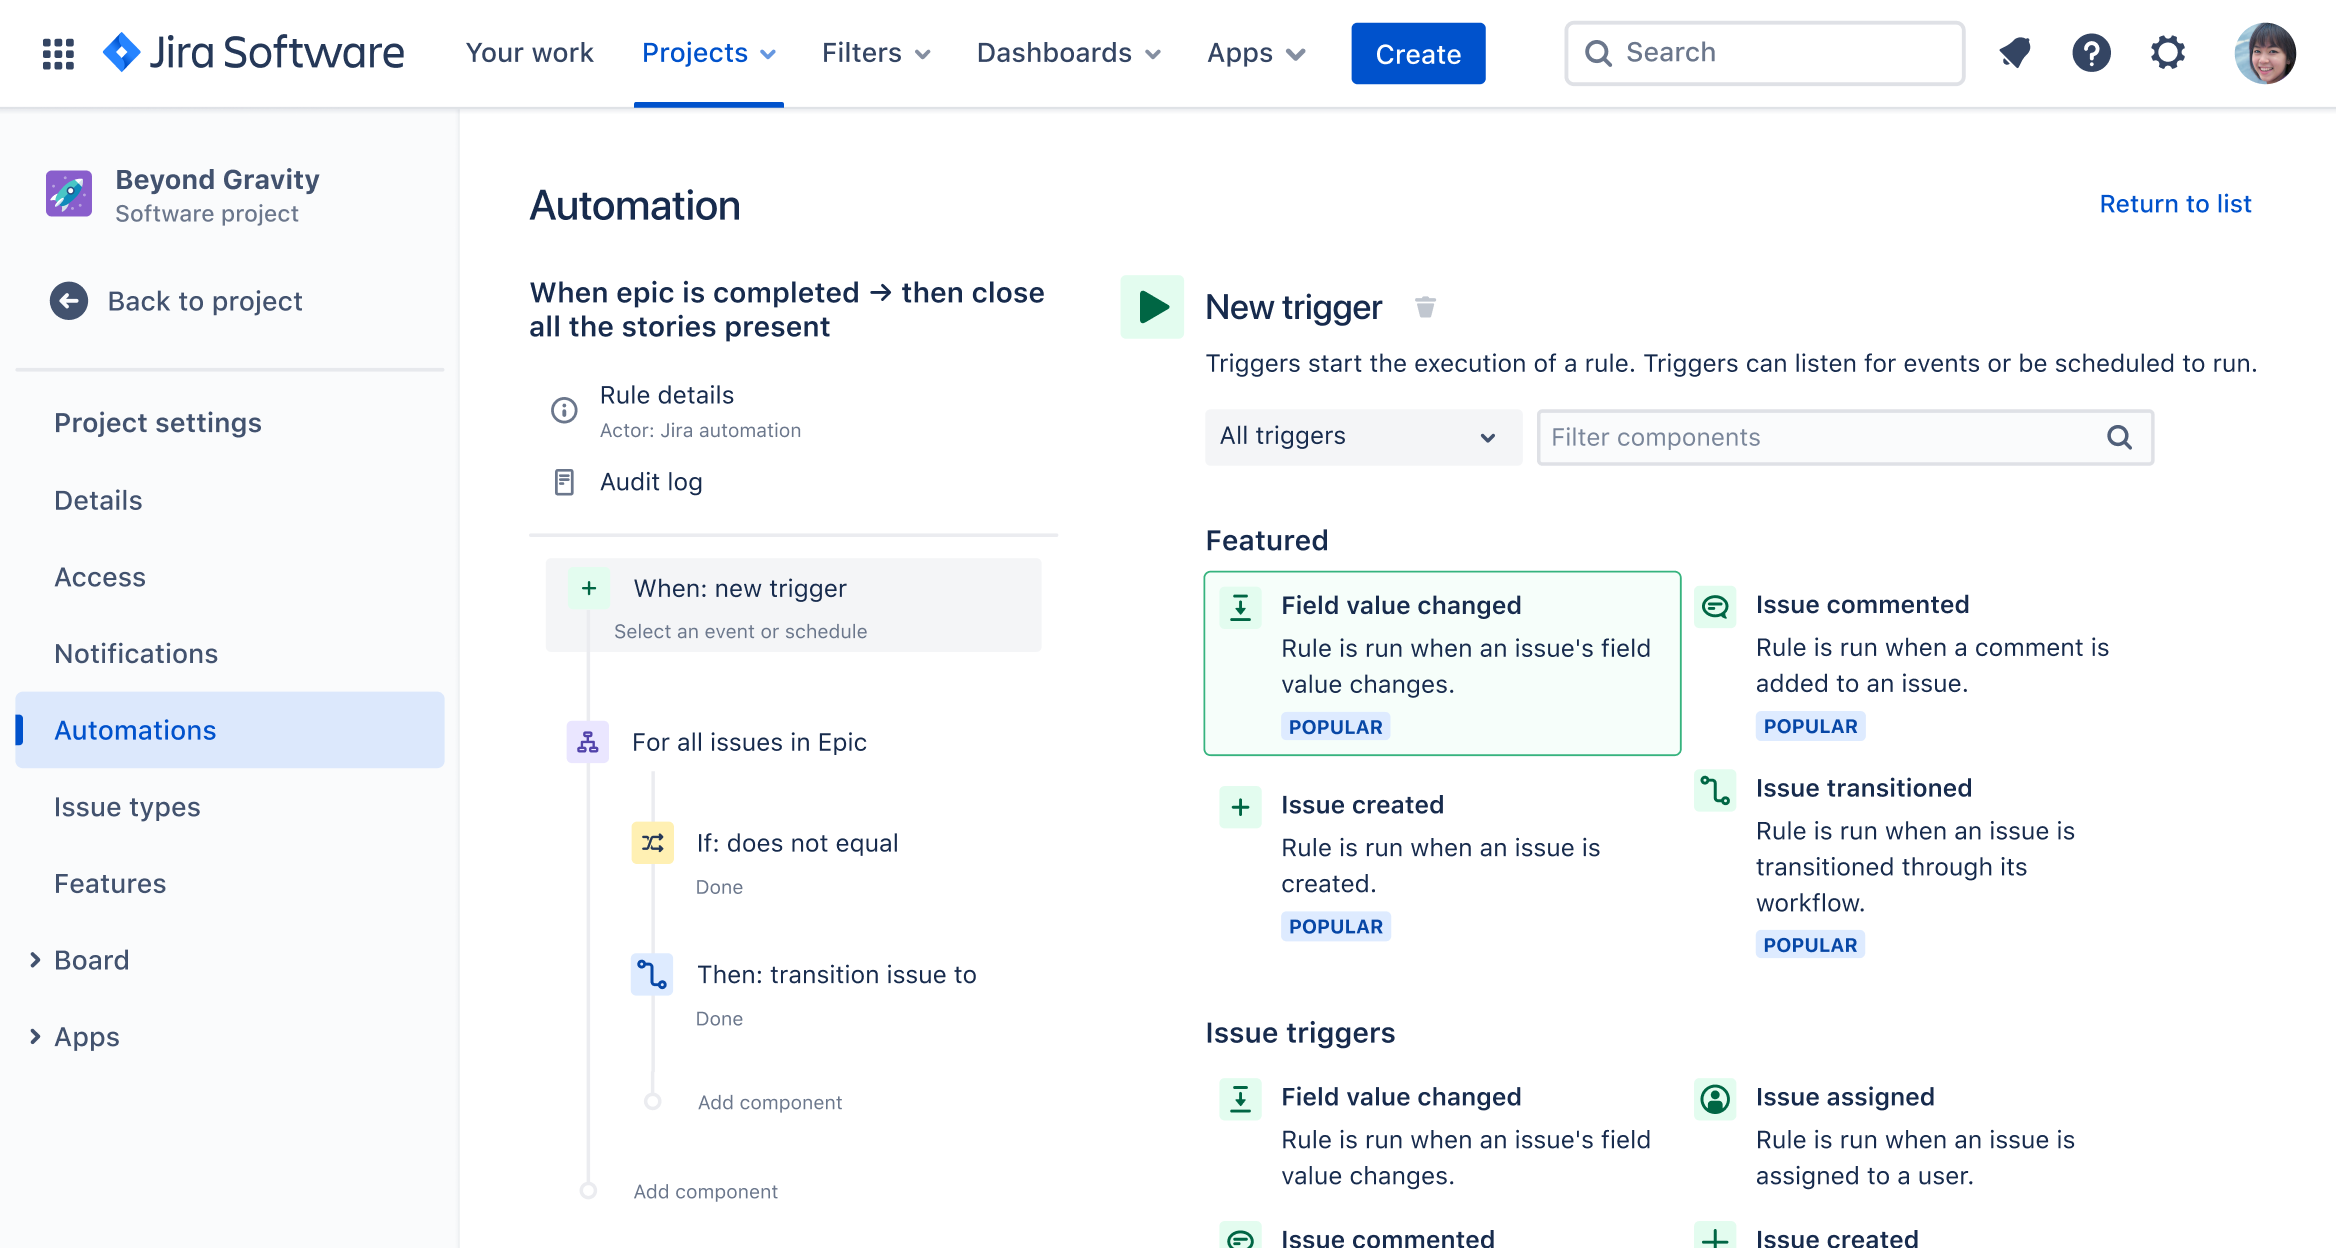 Automations screen in Jira software